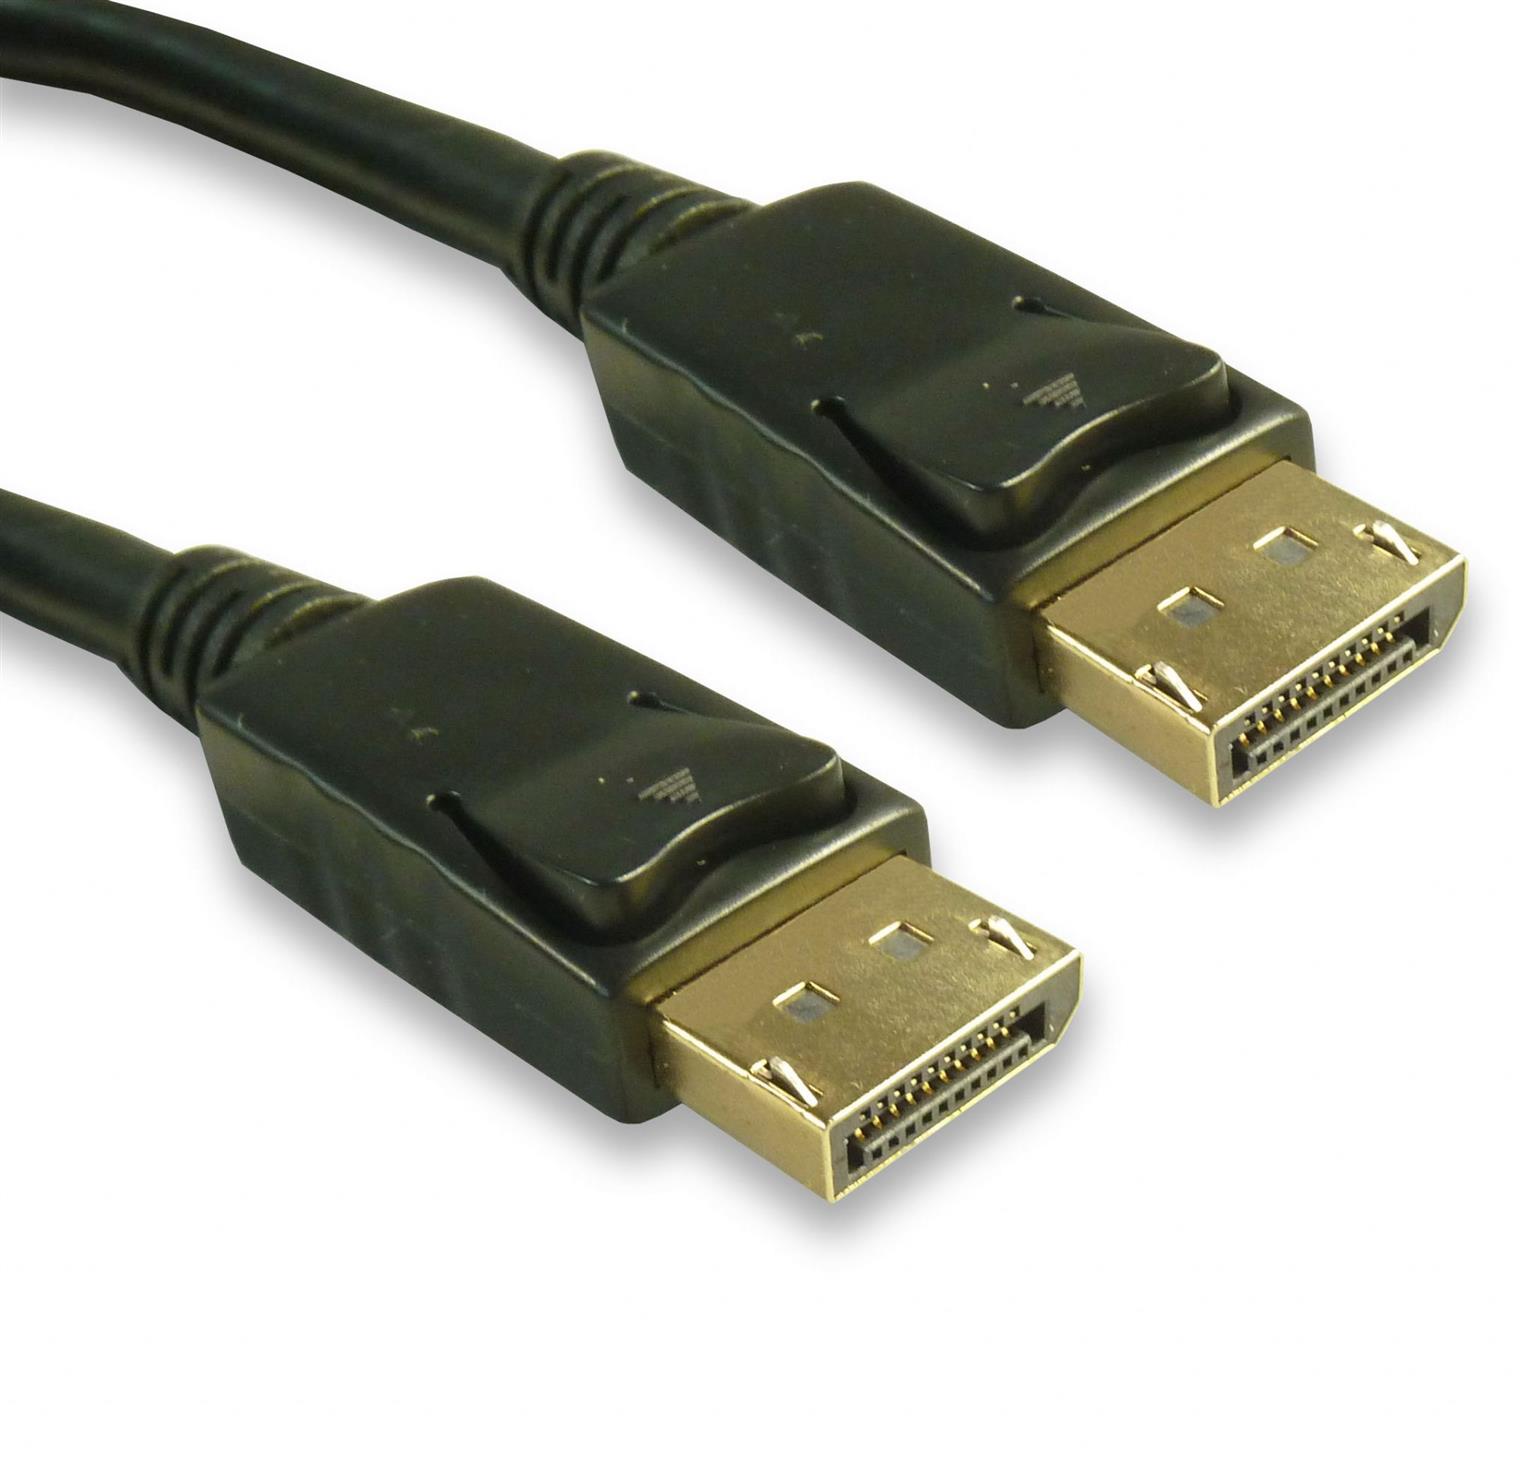 Display Port 0.5m Cable 